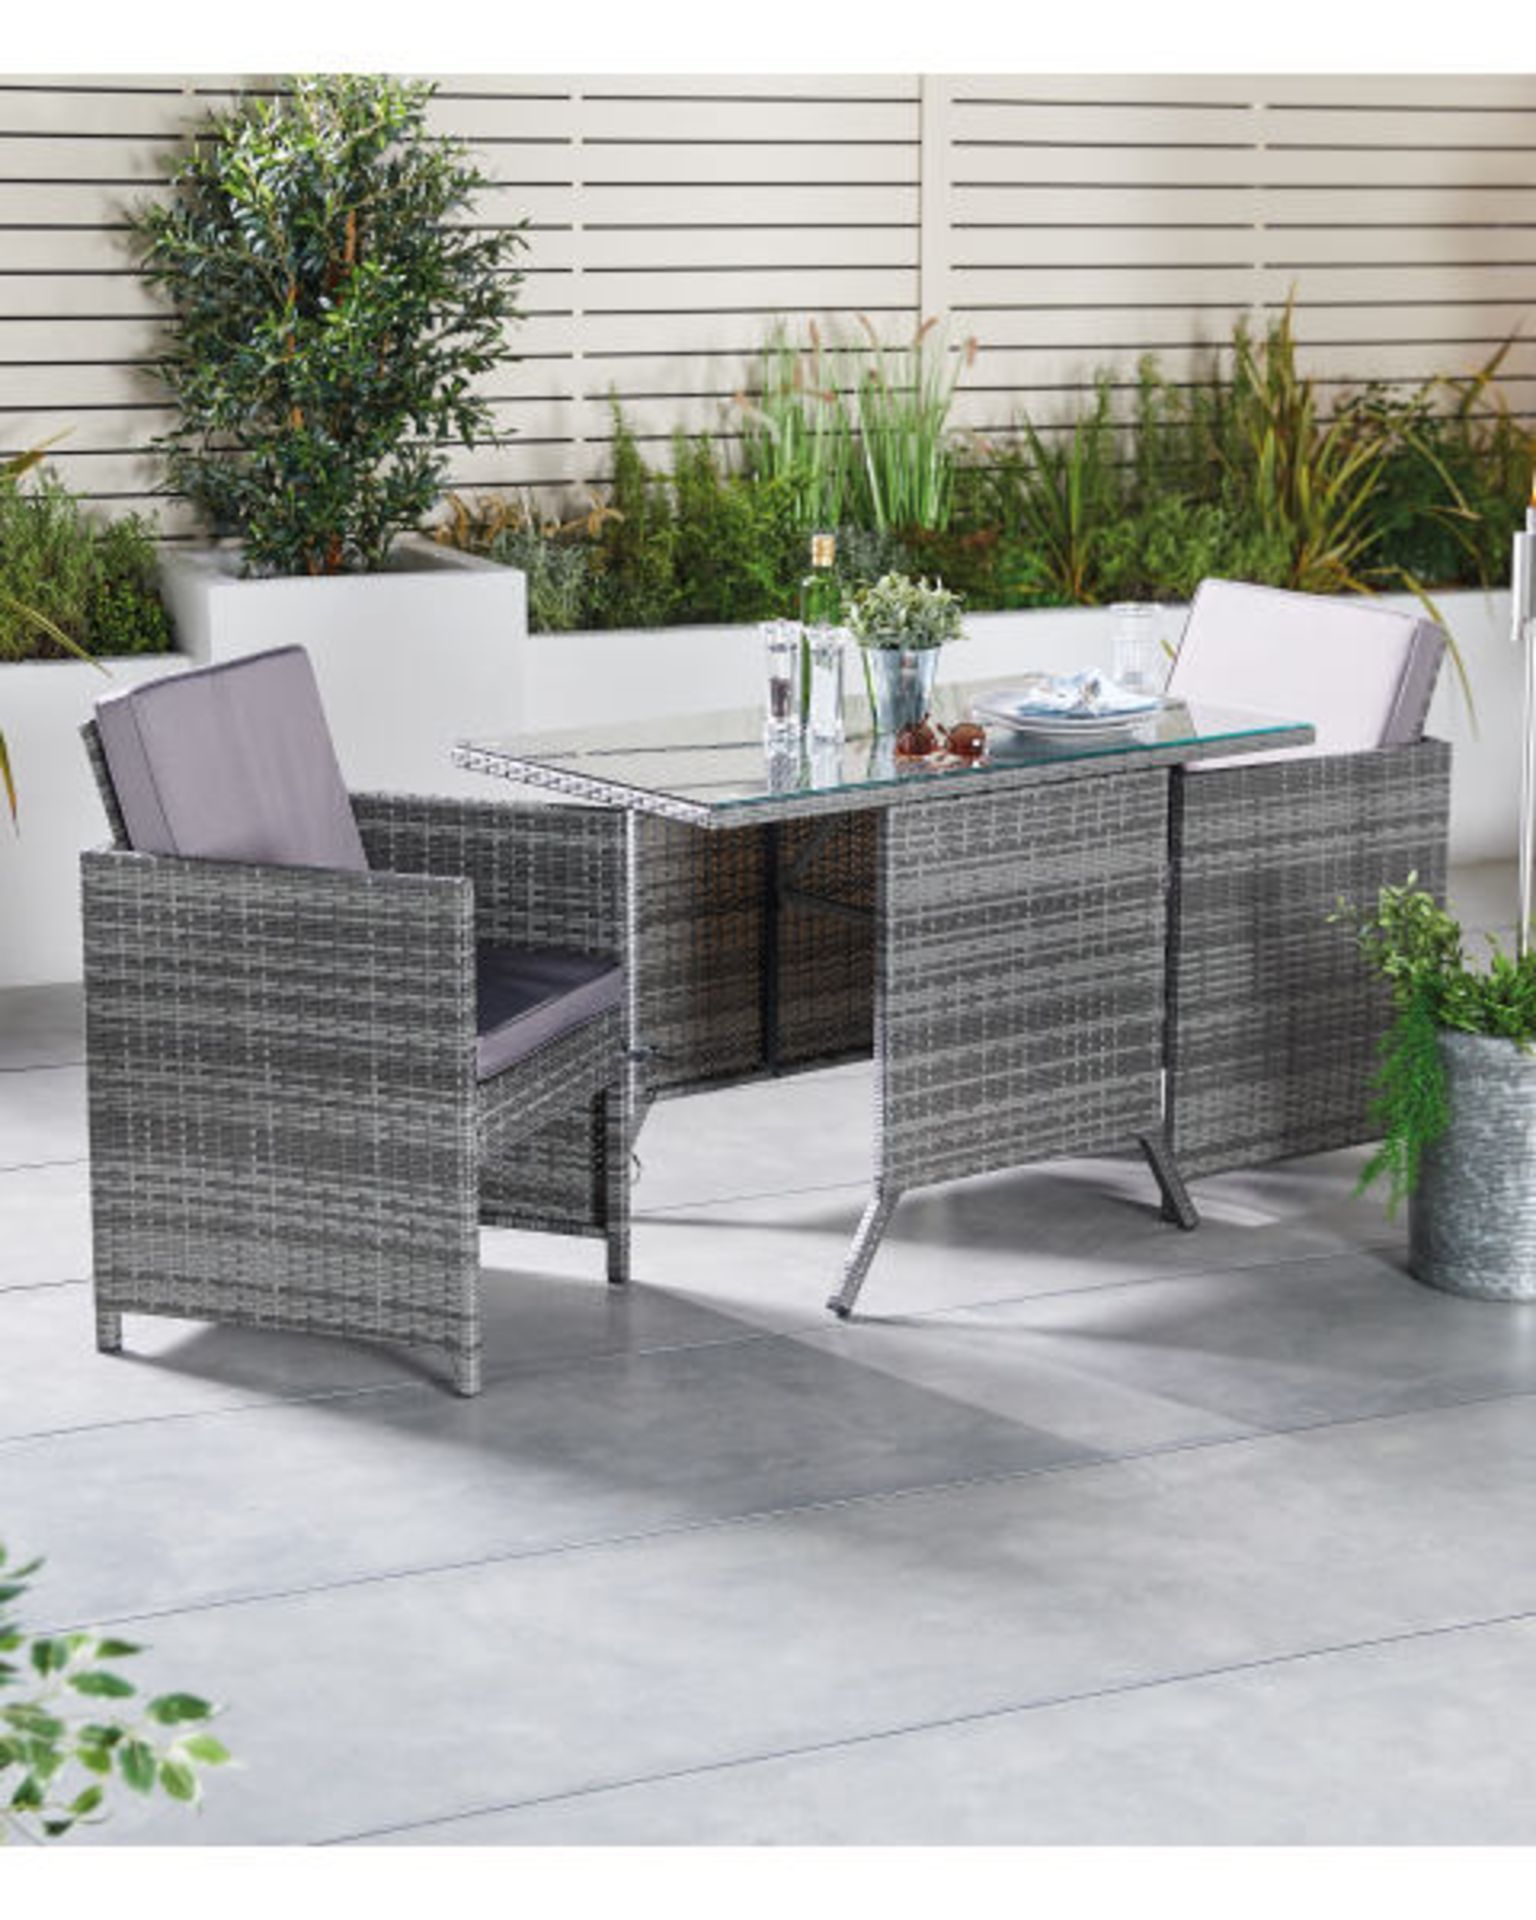 Luxury Rocking Bistro Set. Sit back and rock away in style with this stunning Luxury Rocking